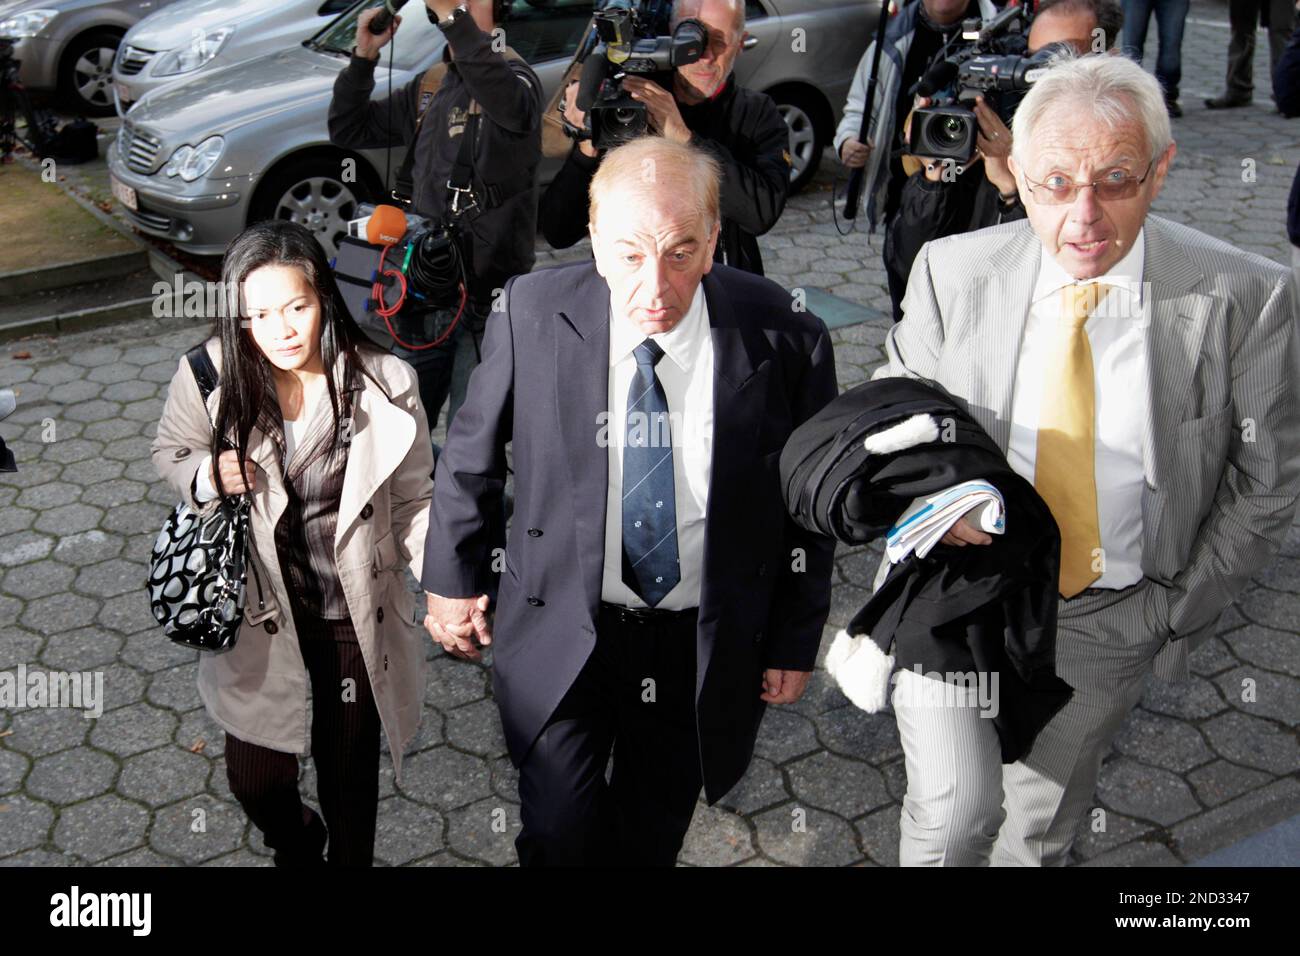 Former Lernout & Hauspie CEO Jo Lernout, center, arrives with his lawyer Luc Gheysens, right, at the court house in Ghent, Belgium, Monday, Sept. 20, 2010. The verdict is due in Belgium's largest fraud trial, former speech technology company Lernout & Hauspie. (AP Photo/Yves Logghe) Stock Photo